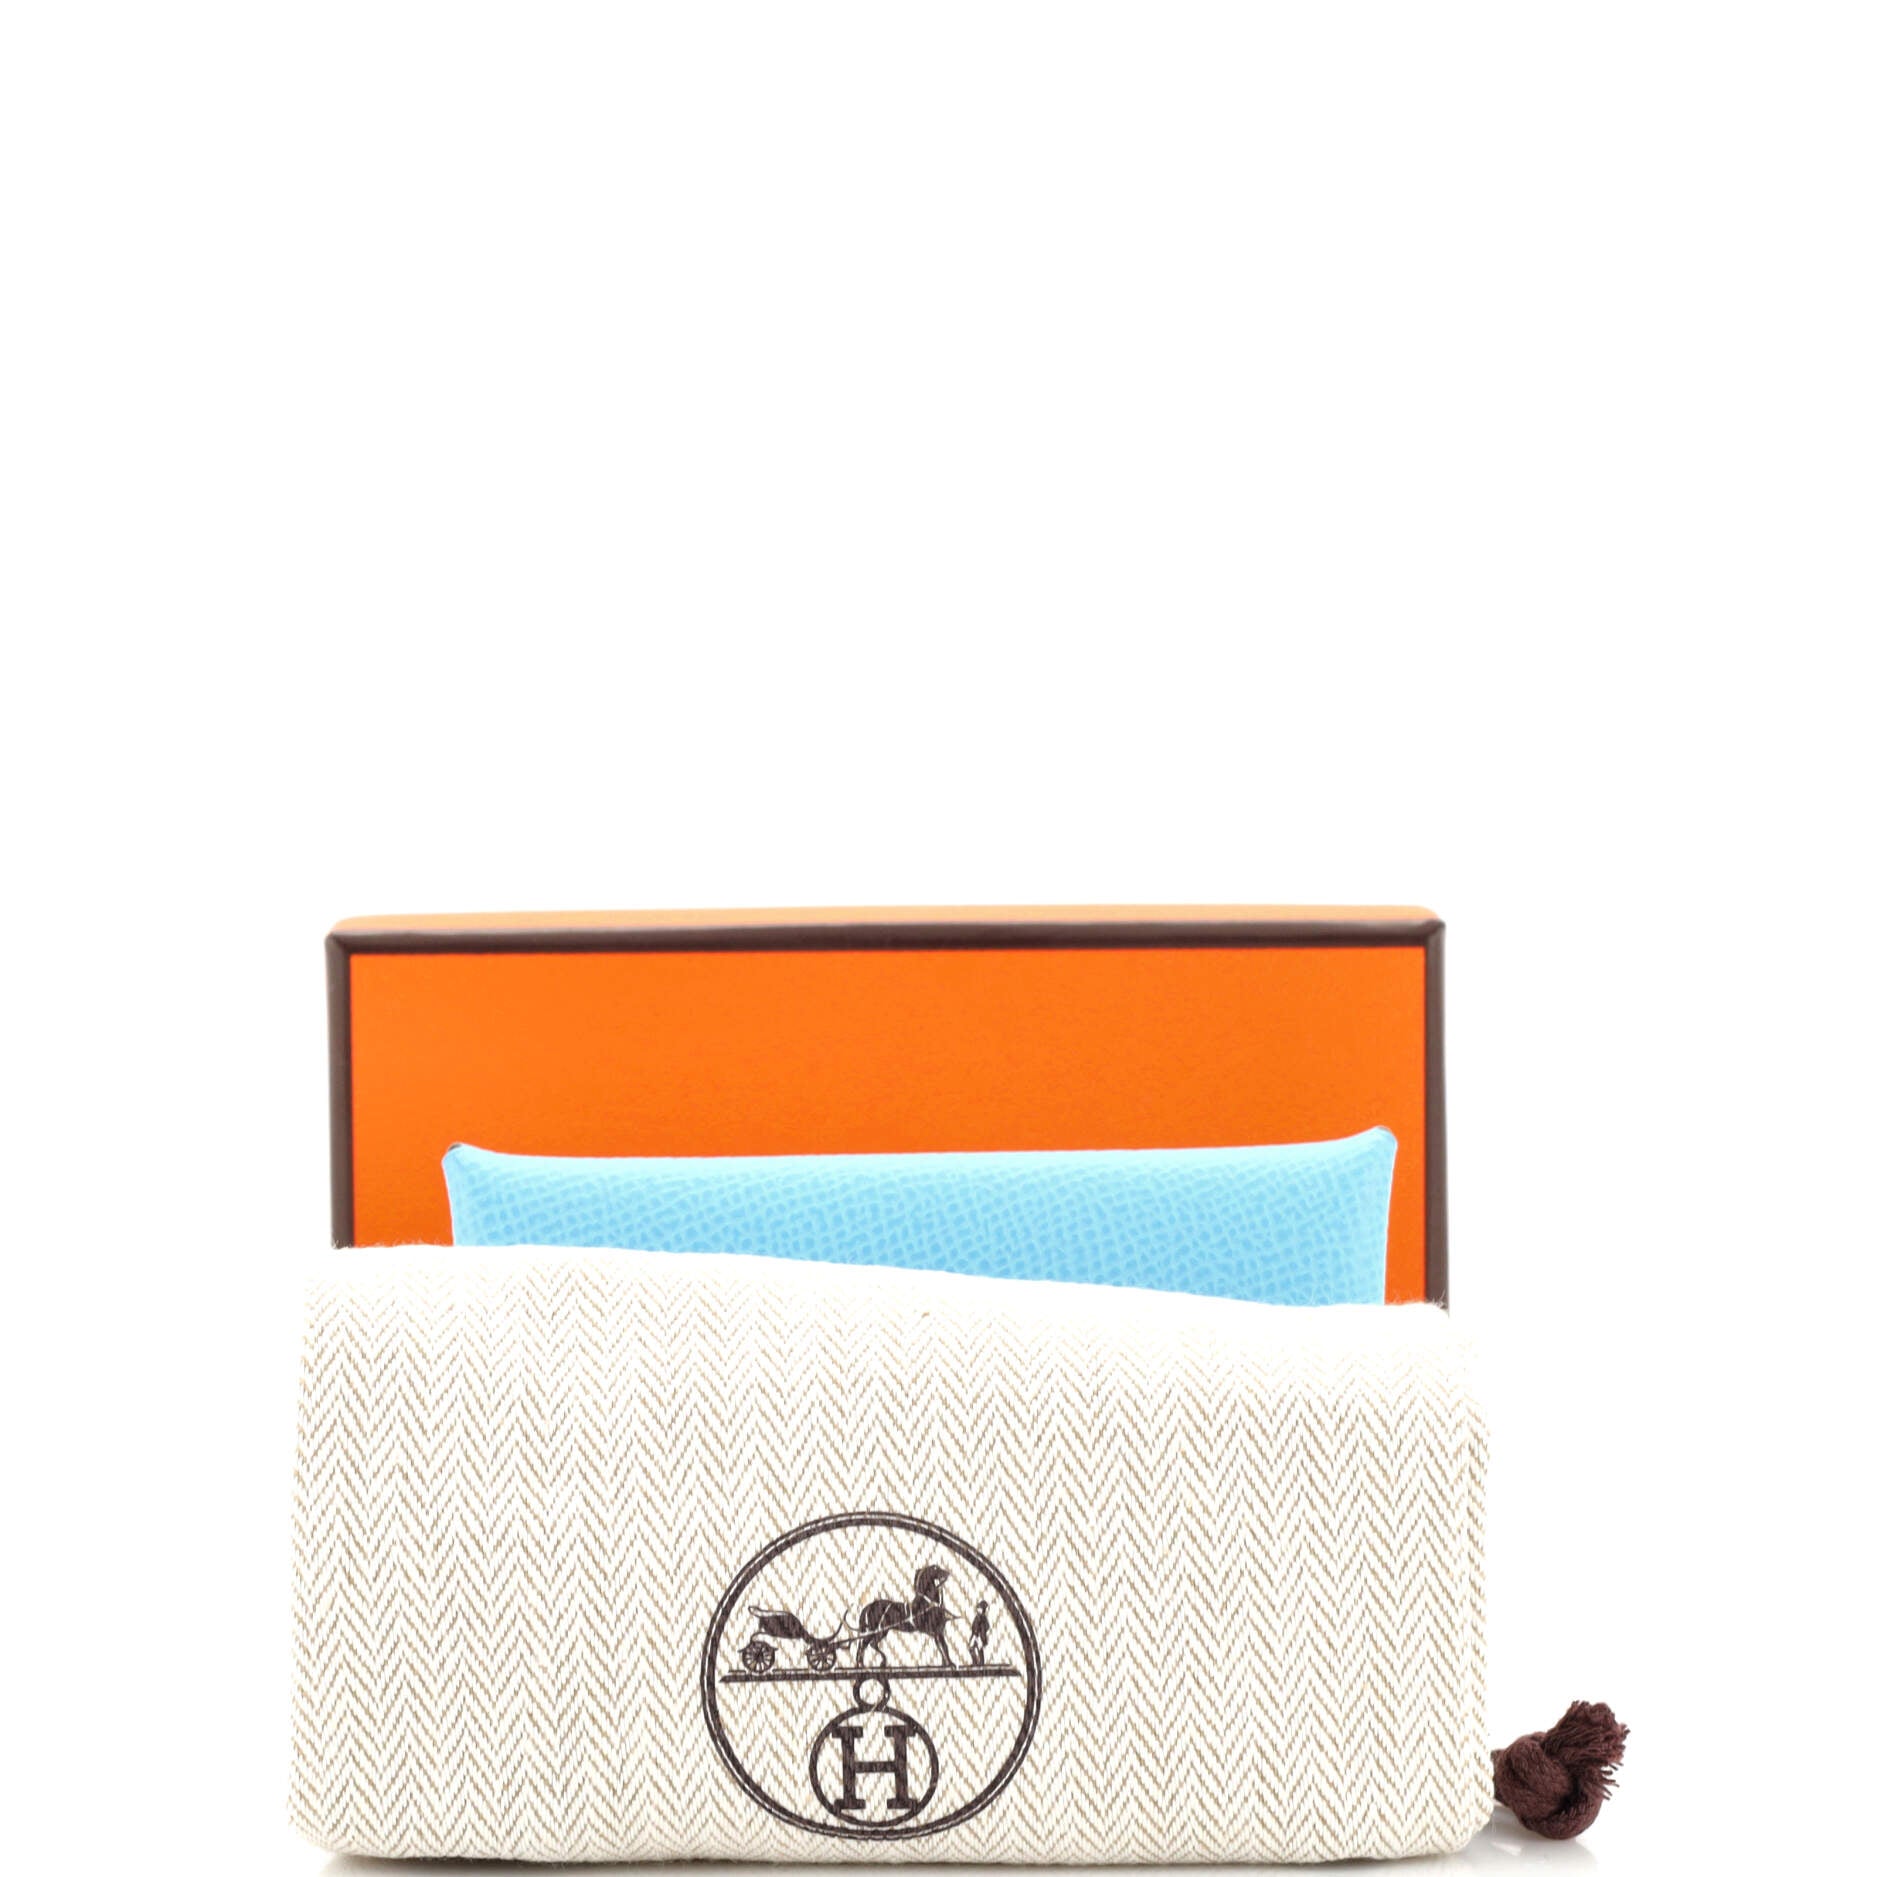 Colormatic card holder